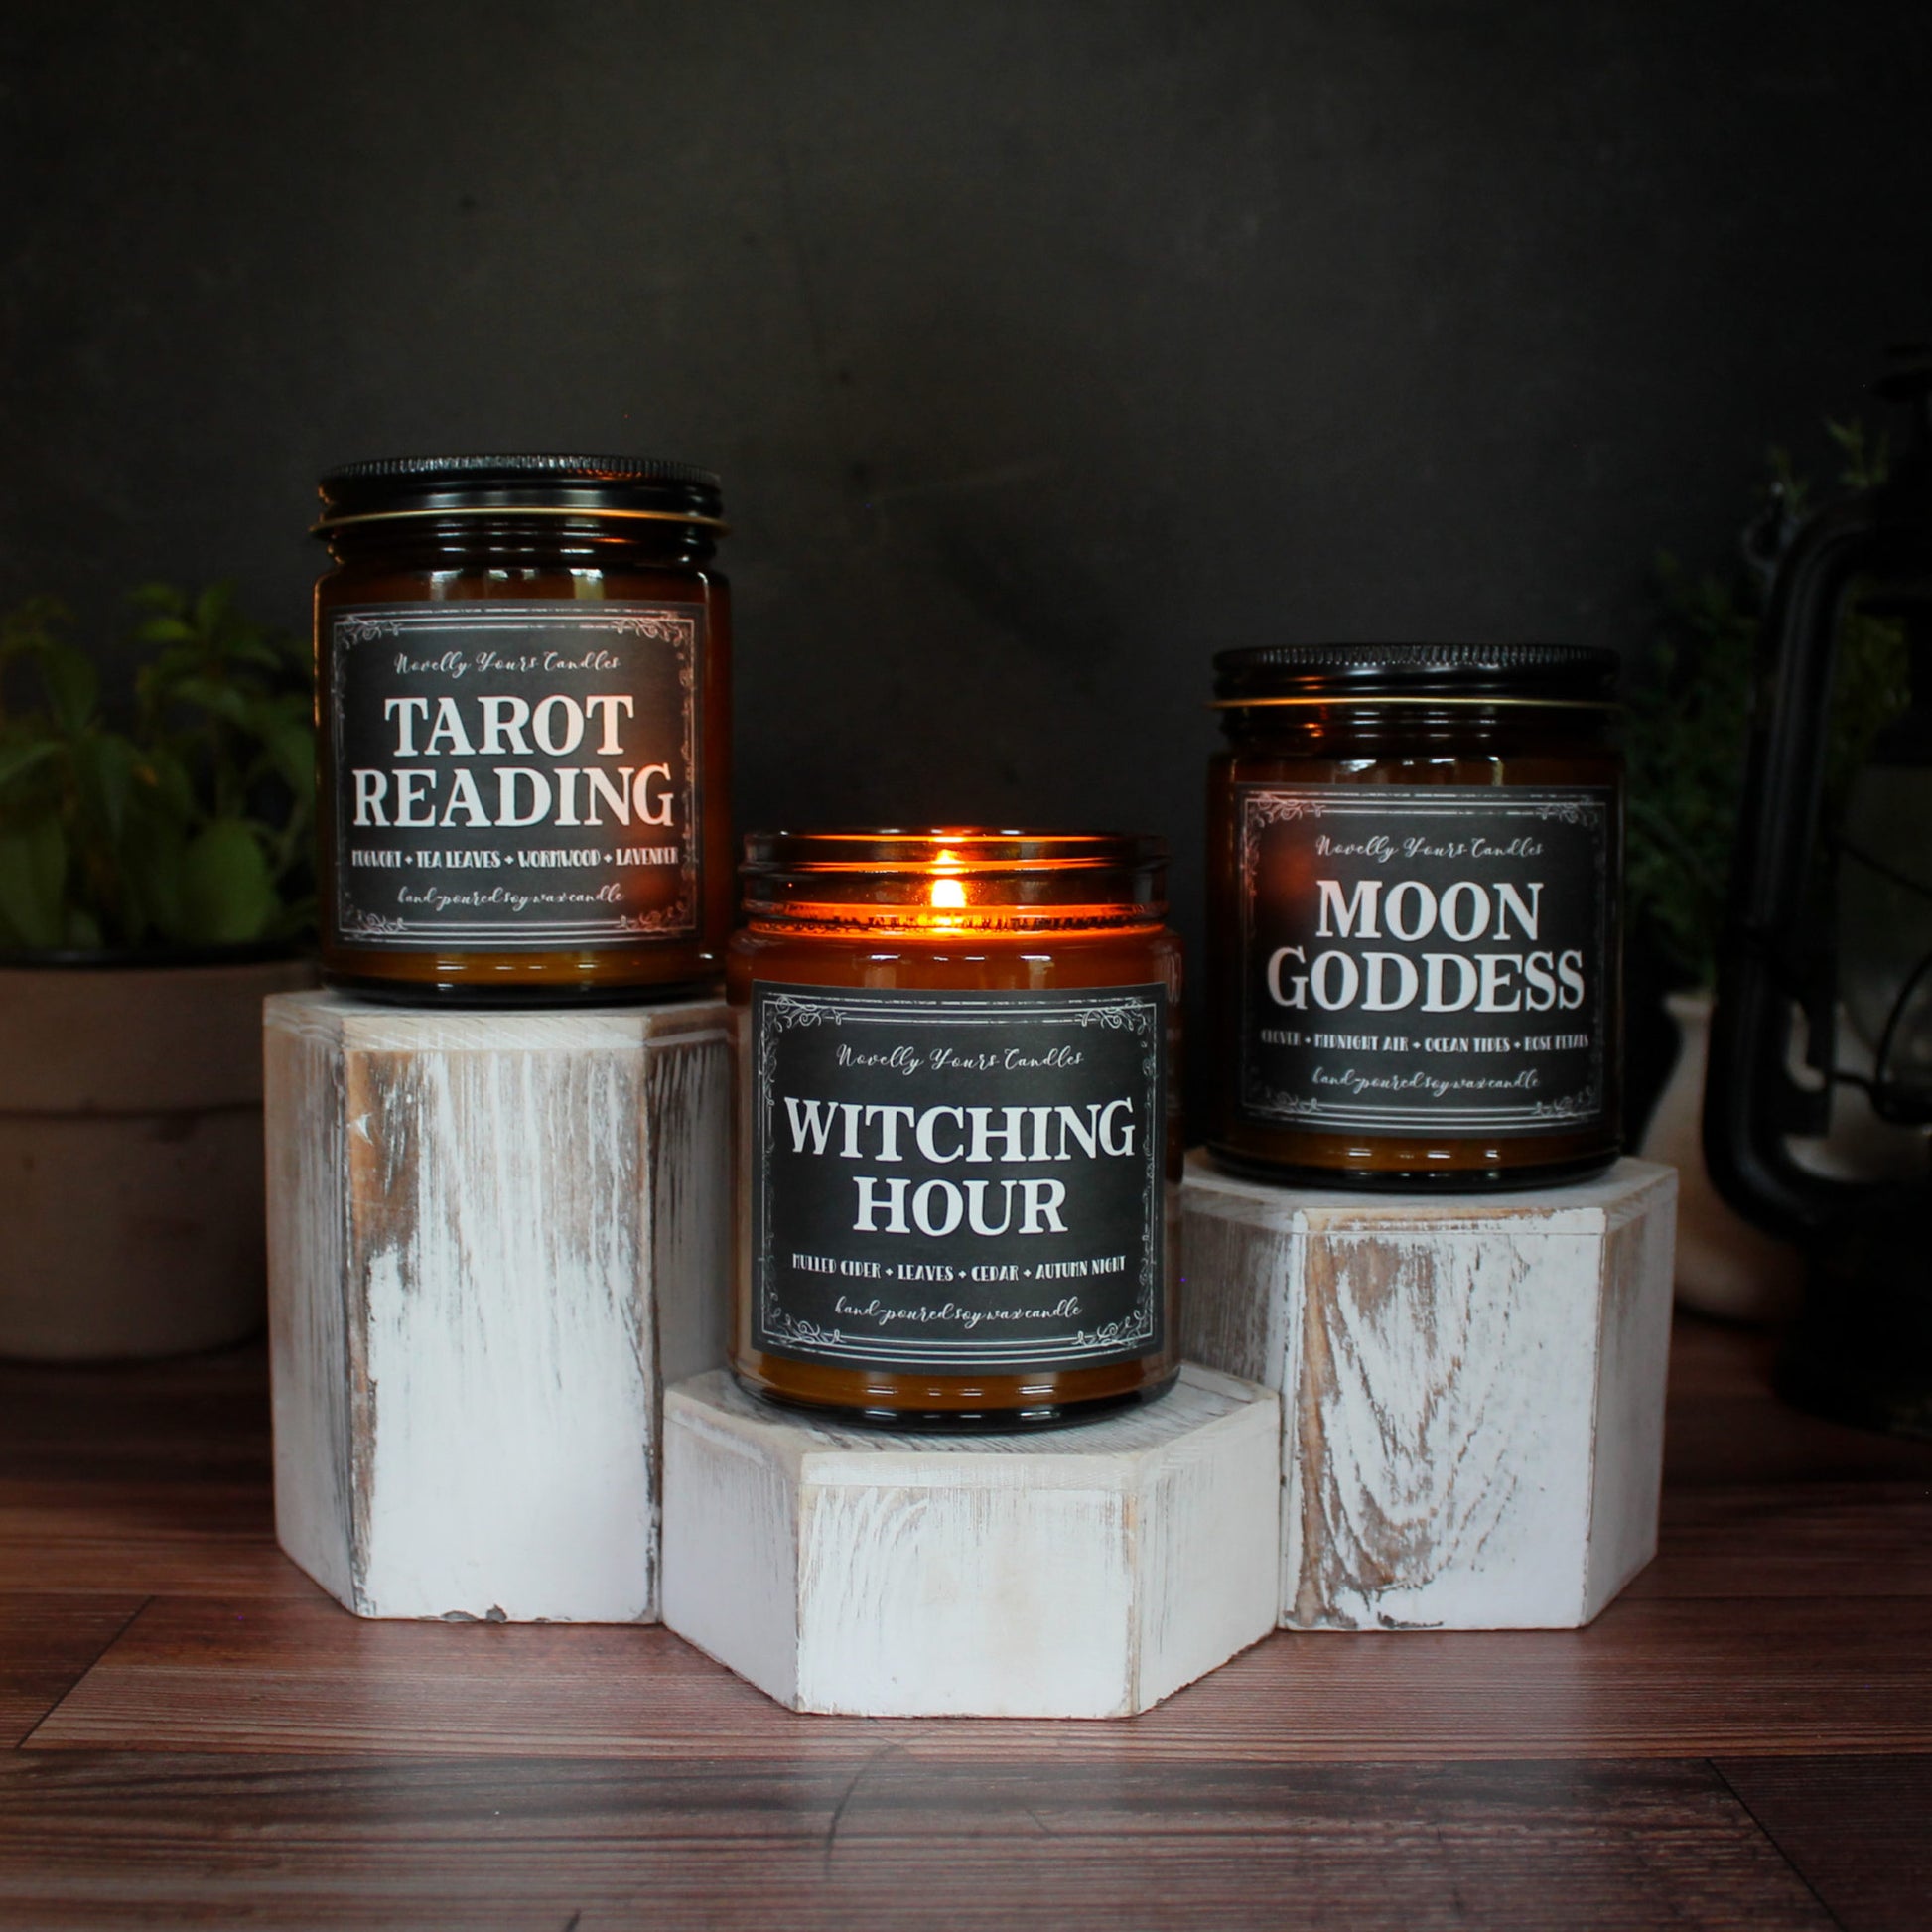 three Novelly Yours candles: tarot reading, witching hour, and moon goddess. Each sits on a hexagonal white wooden pedestal, all of different heights. Pedestals rest on wooden surface with black background and dark, moody aesthetic.